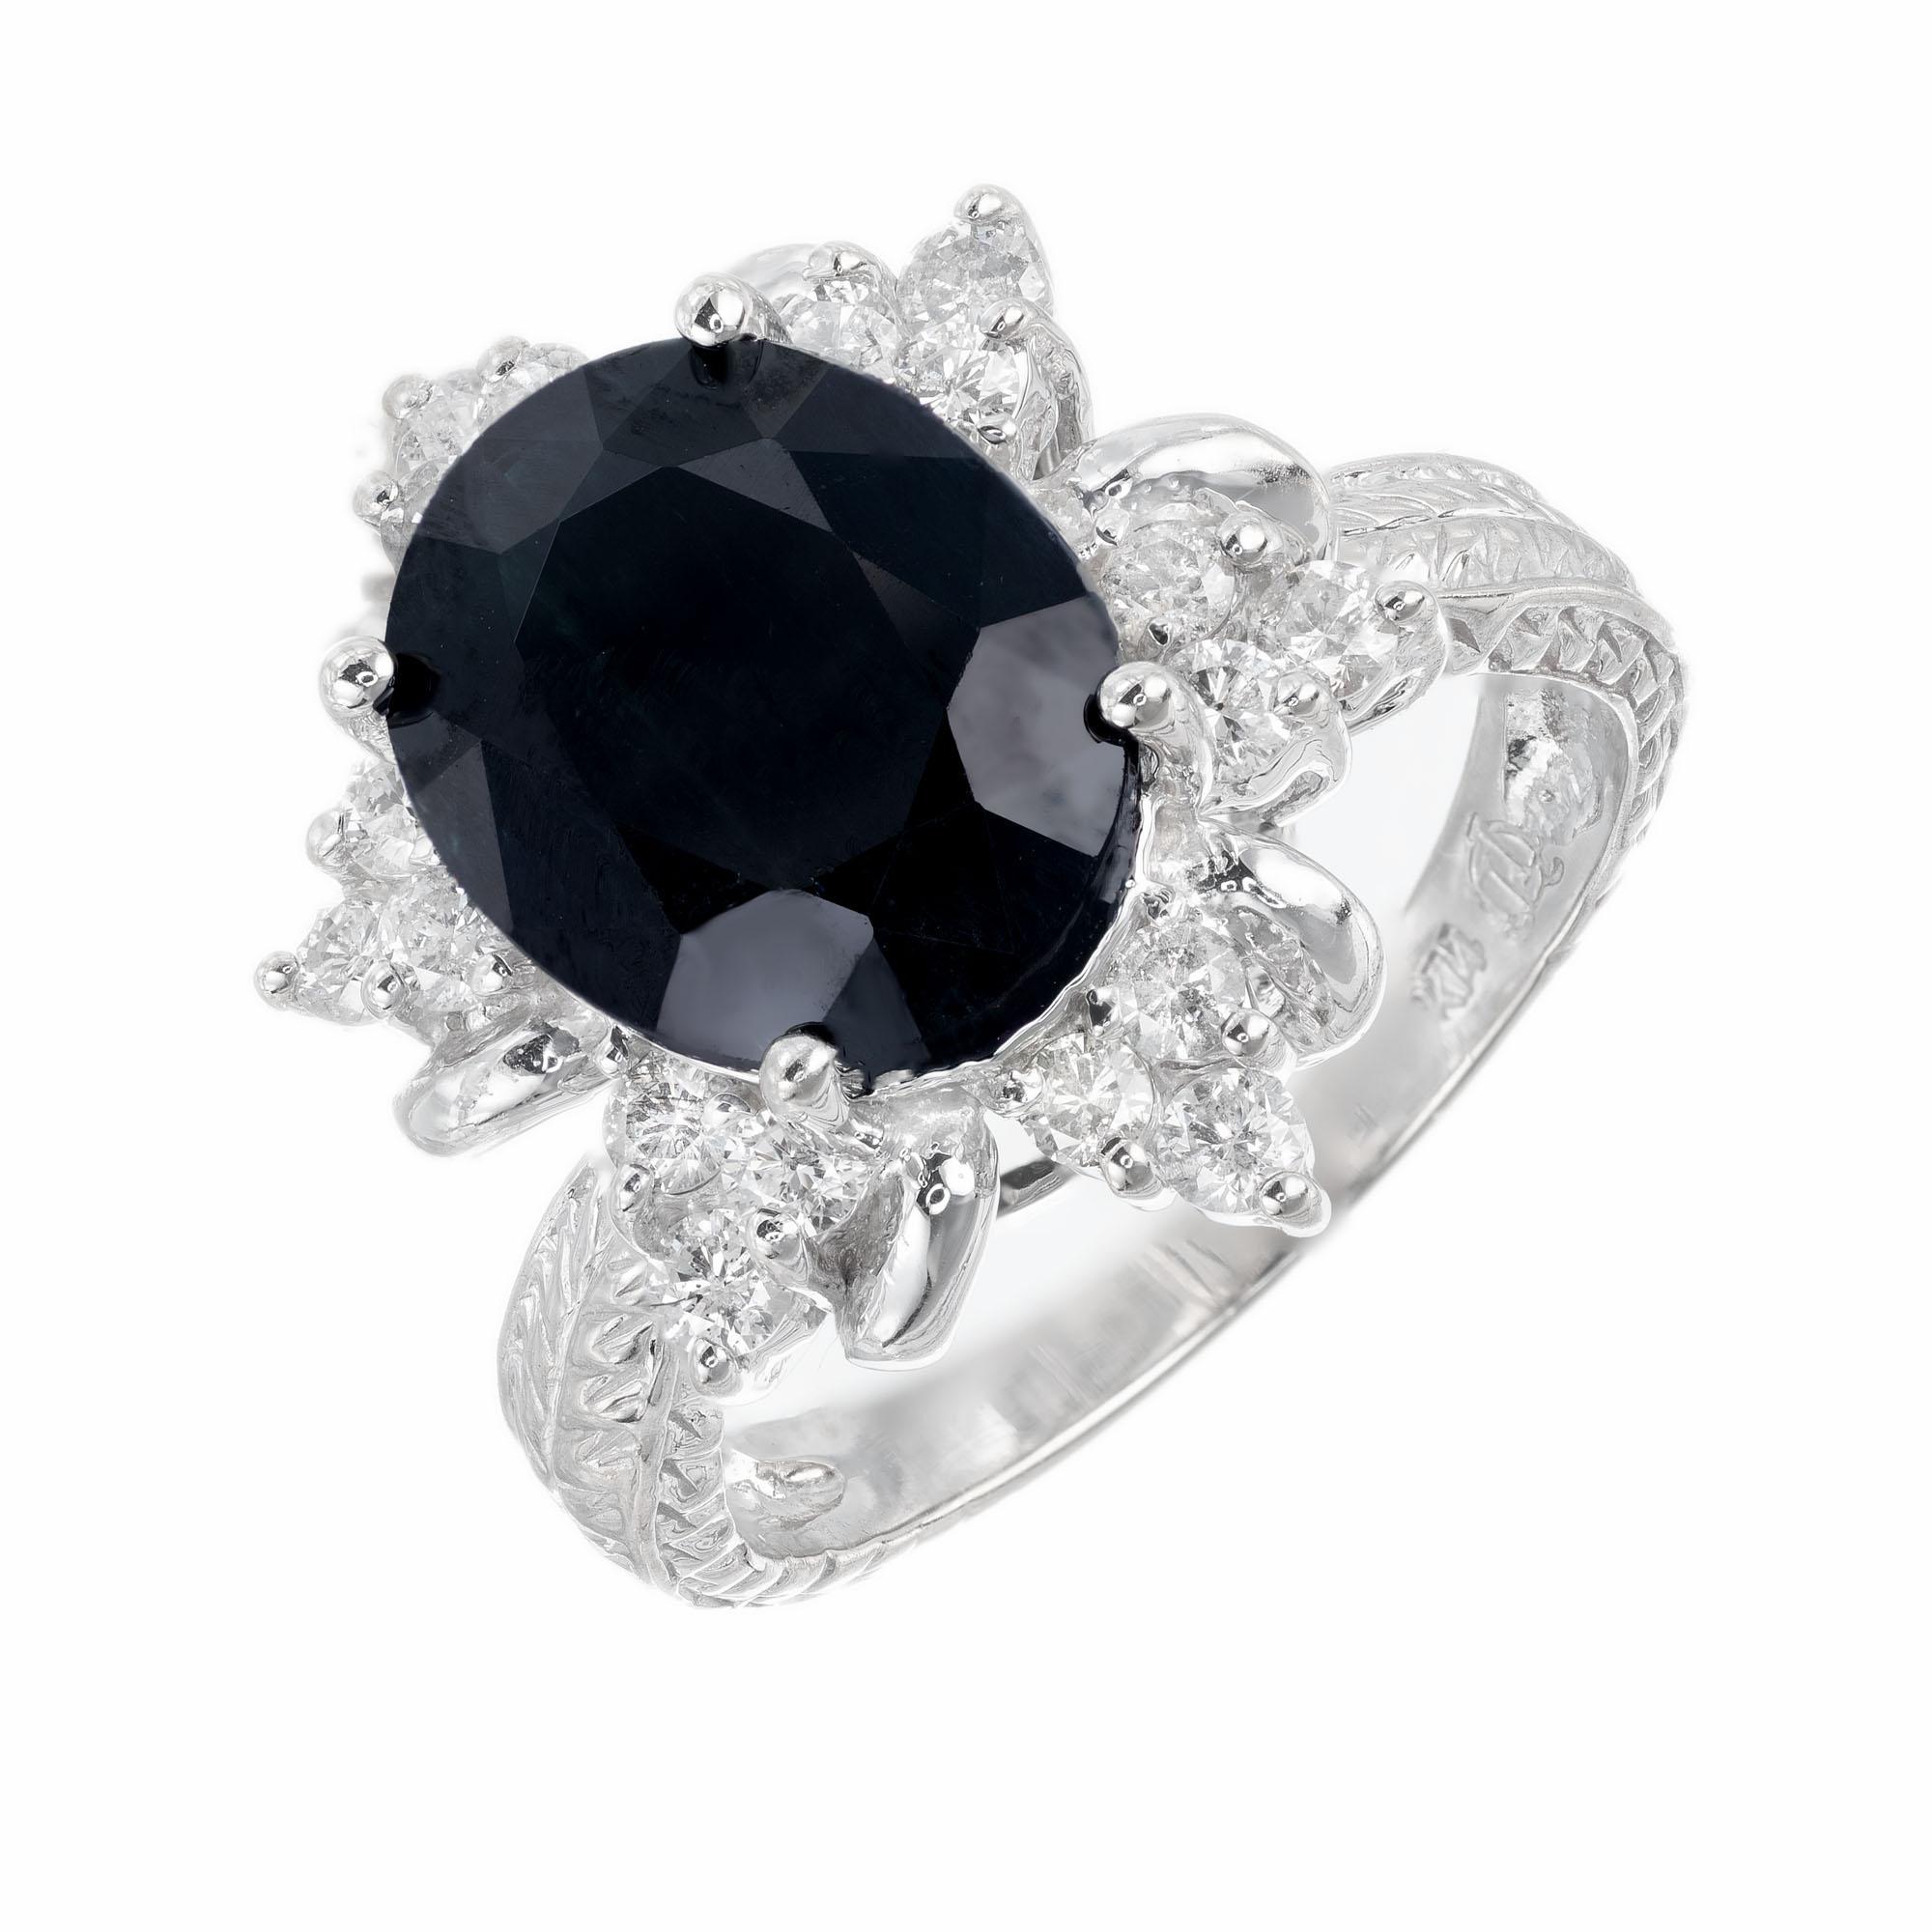 Oval 3.80ct deep blue Sapphire with a halo of 18 full cut diamonds. 14k white gold setting with engraving along the shank. 

1 Oval genuine deep dark blue Sapphire, approx. total weight 3.80cts, 11 x 9mm
18 full cut diamonds, approx. total weight